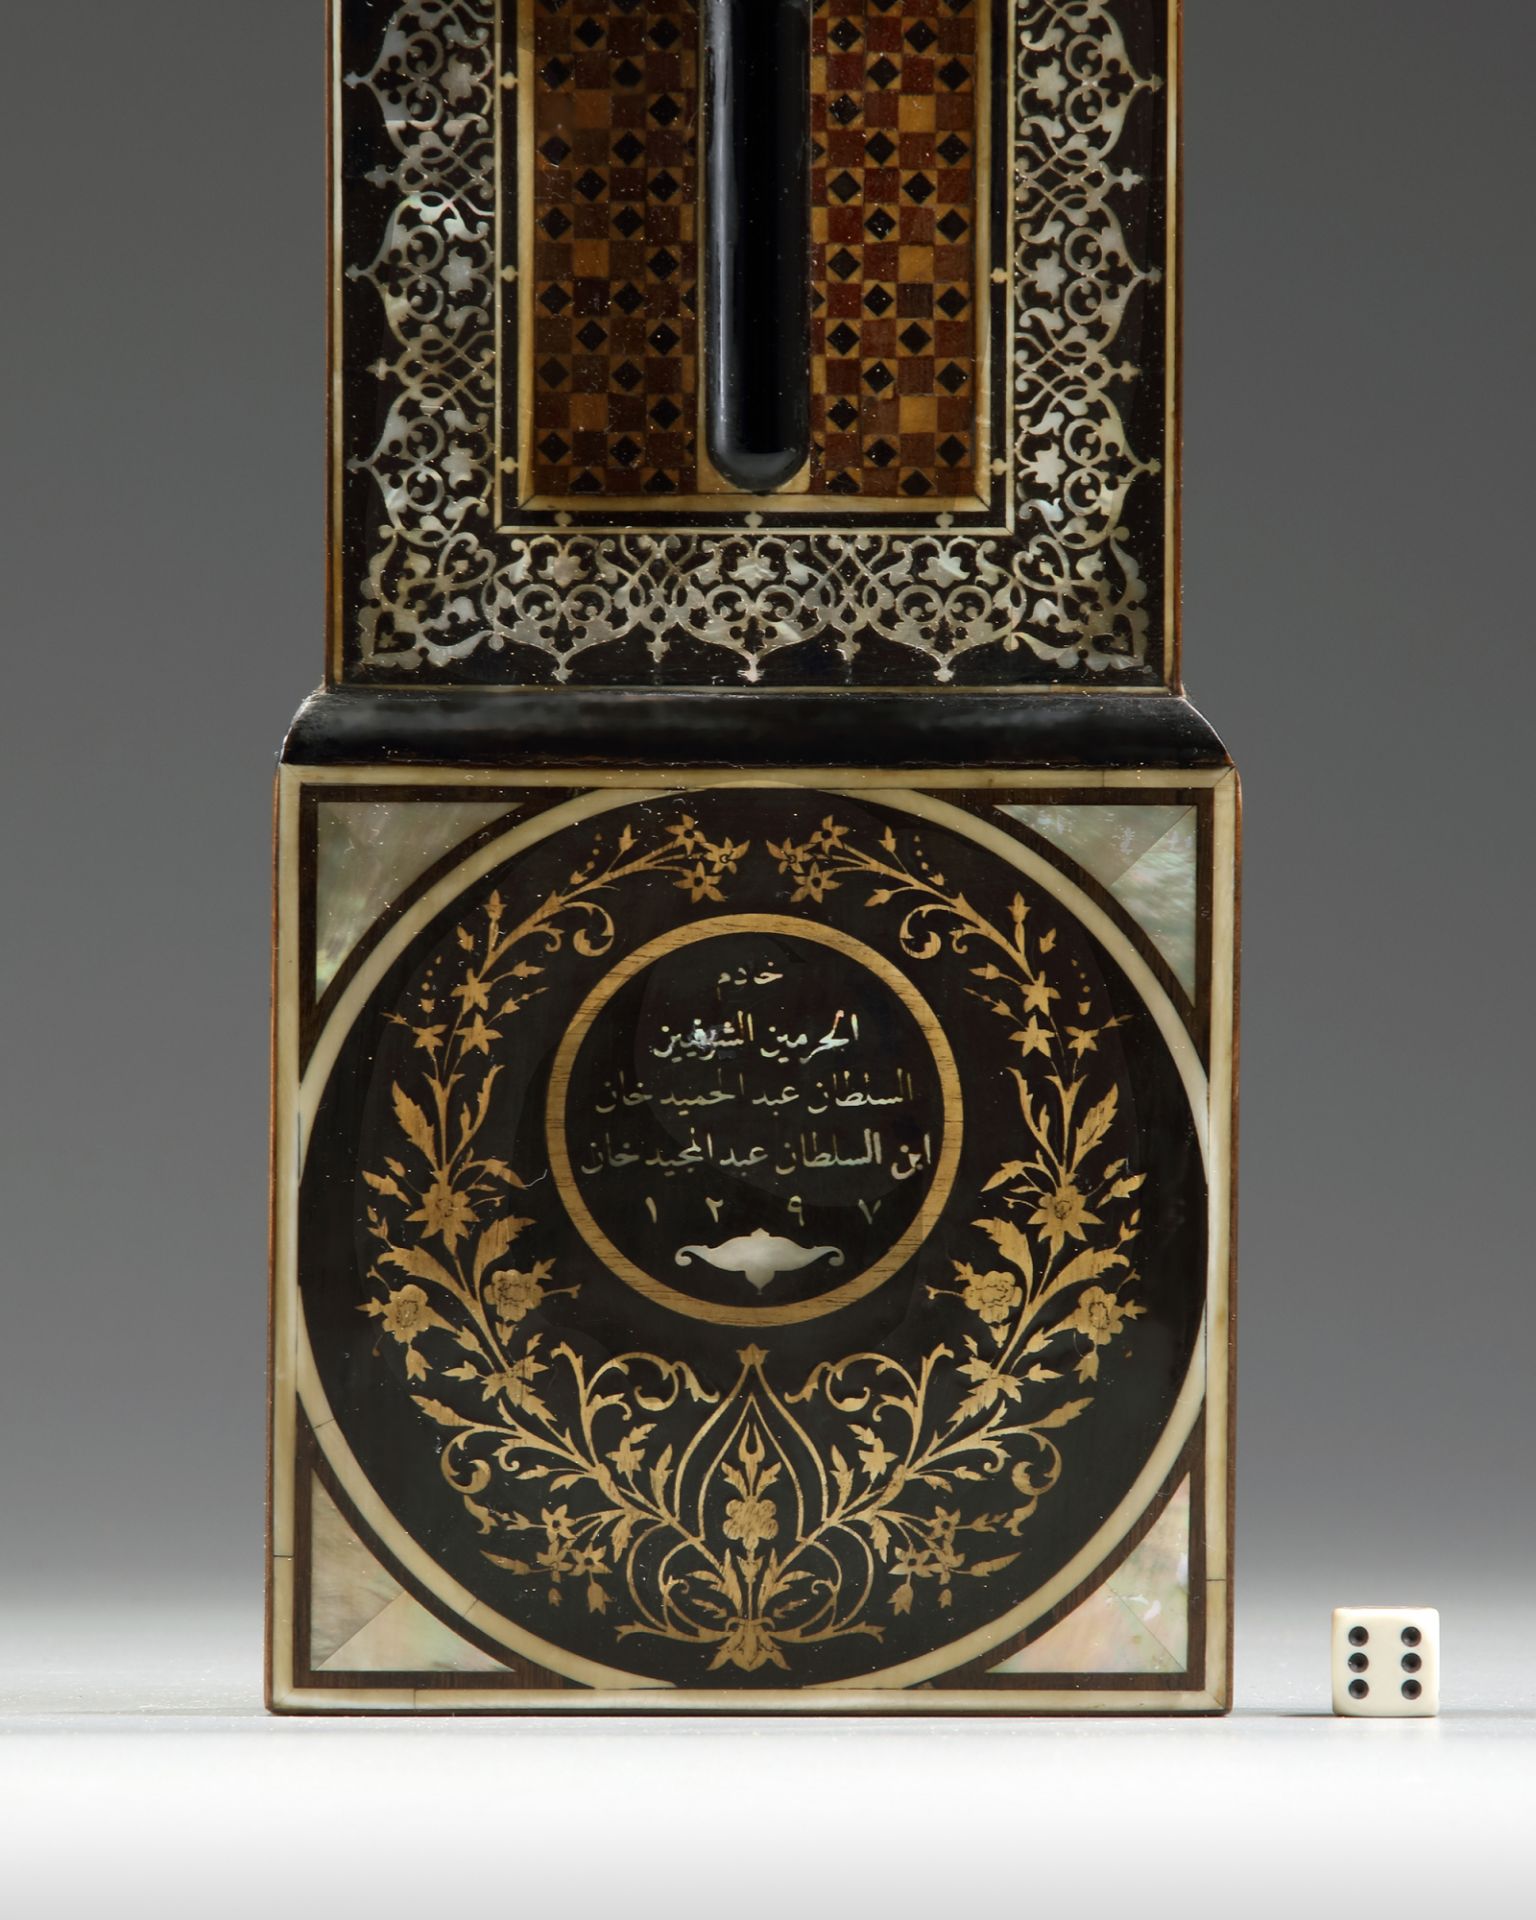 AN OTTOMAN WOODEN MOTHER-OF-PEARL AND IVORY INLAID BAROMETER,1297 AH/1879 - 1880 AD - Image 8 of 12